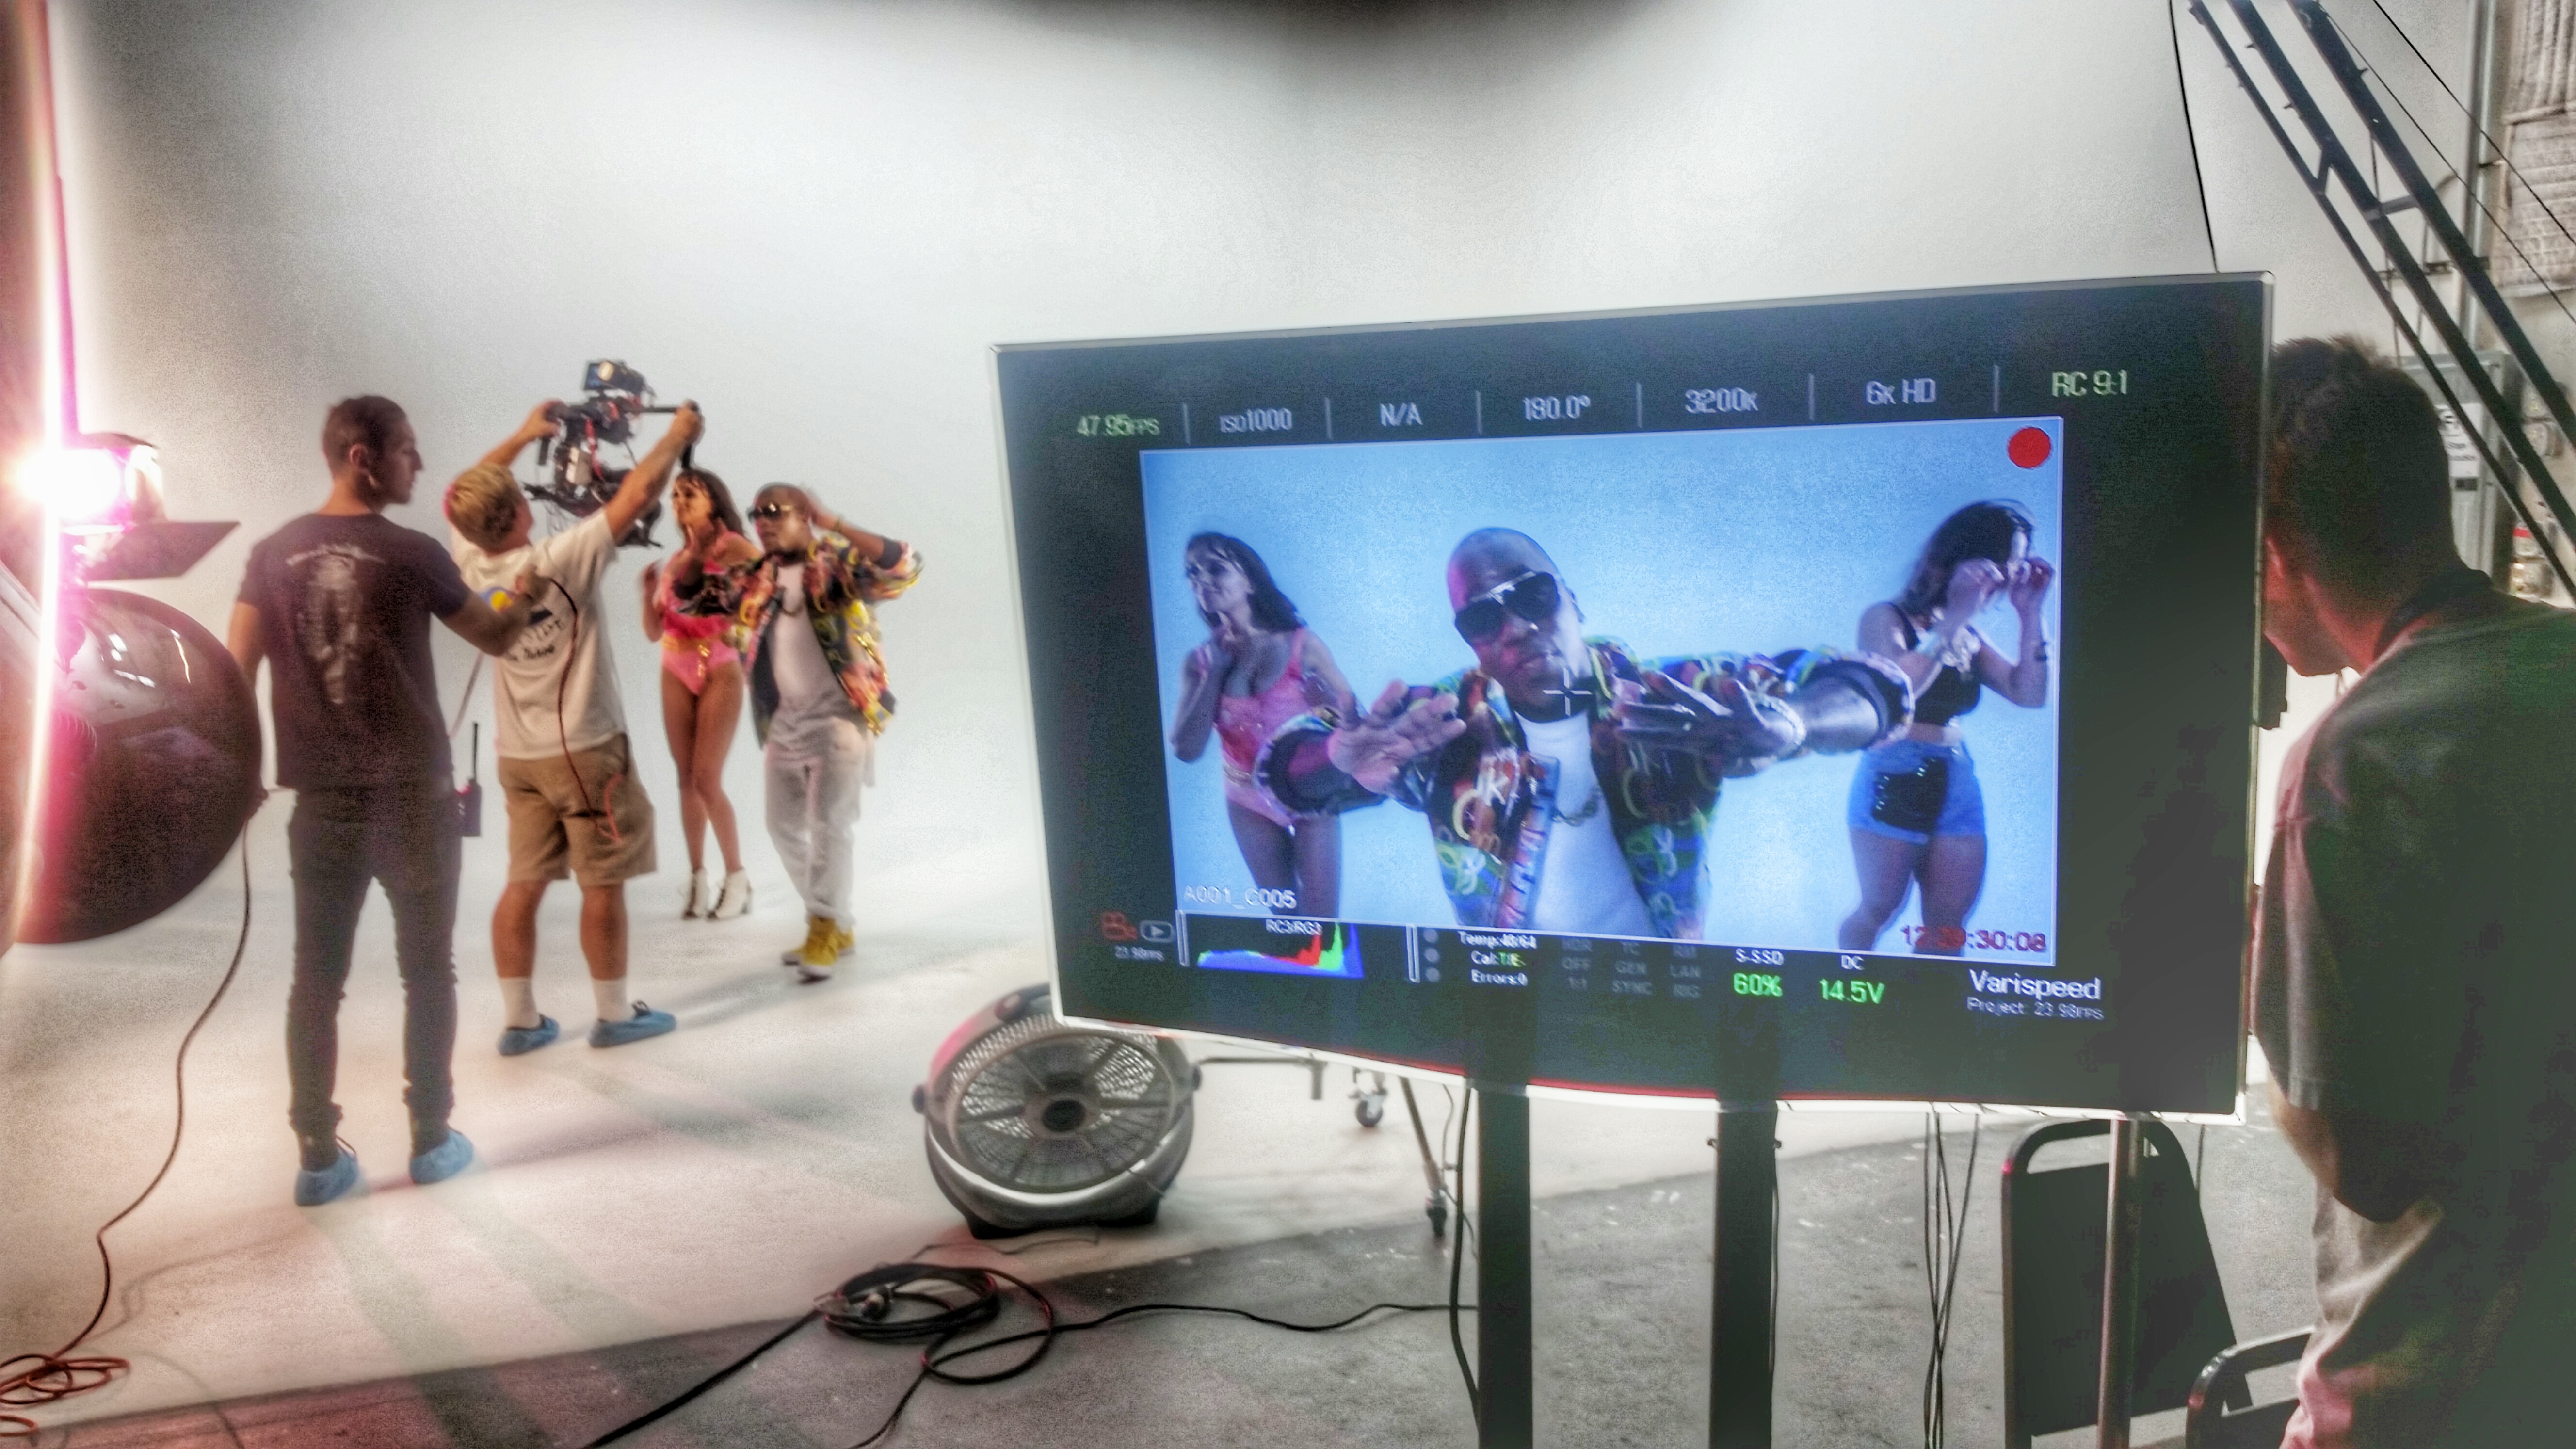 On the set of artist: Iyaz's music video shoot for 